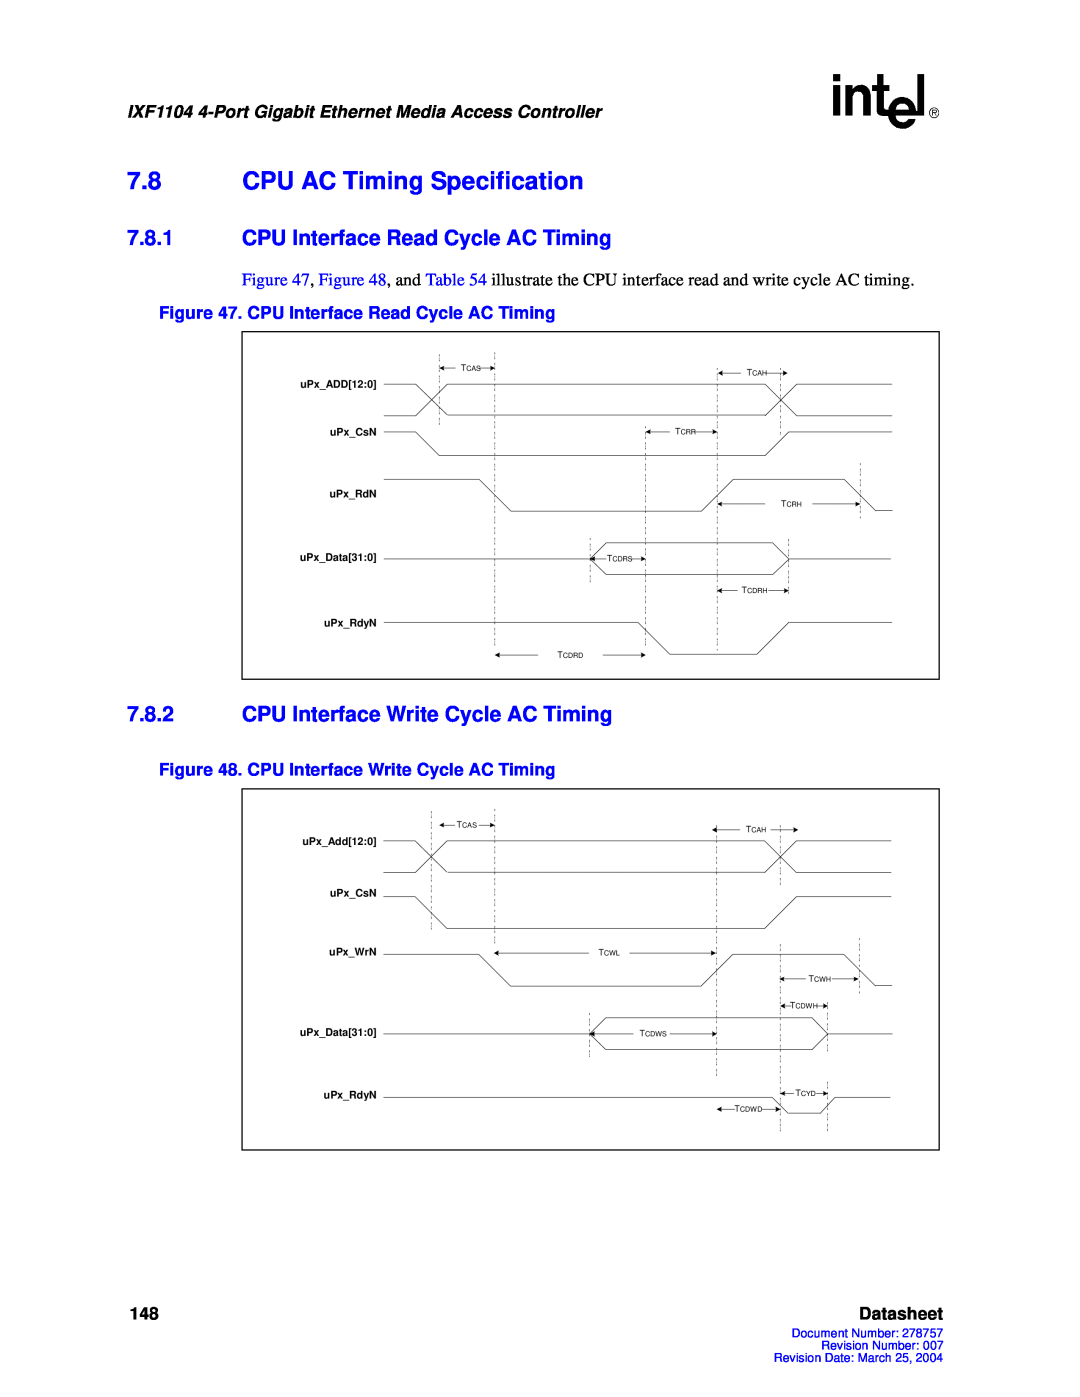 Intel IXF1104 7.8CPU AC Timing Specification, 7.8.1CPU Interface Read Cycle AC Timing, Datasheet, uPx_ADD12:0, uPx_CsN 